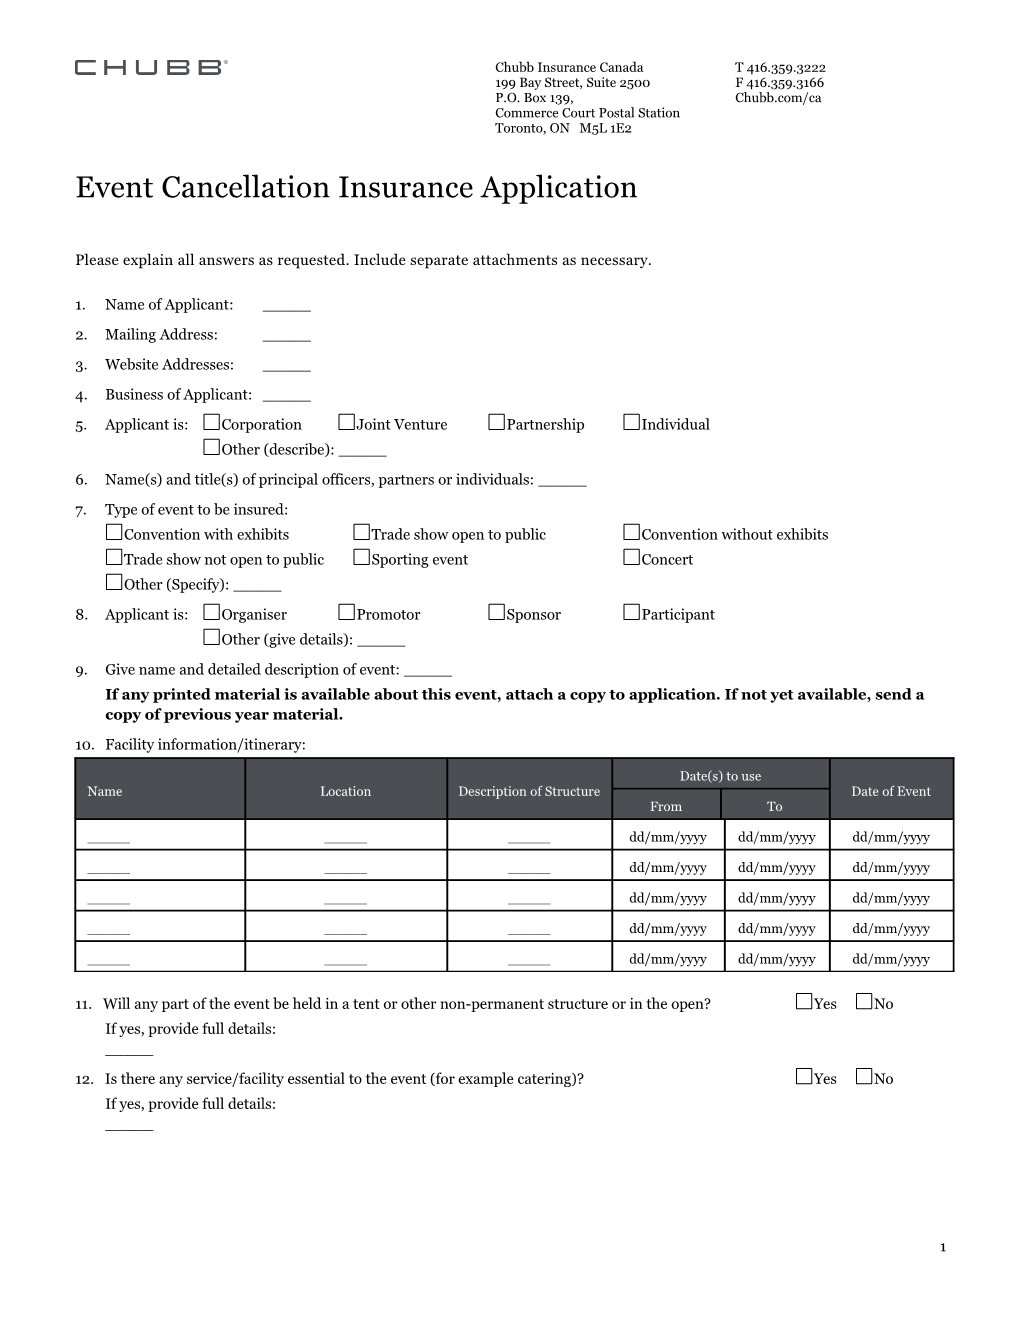 Event Cancellation Insurance Application